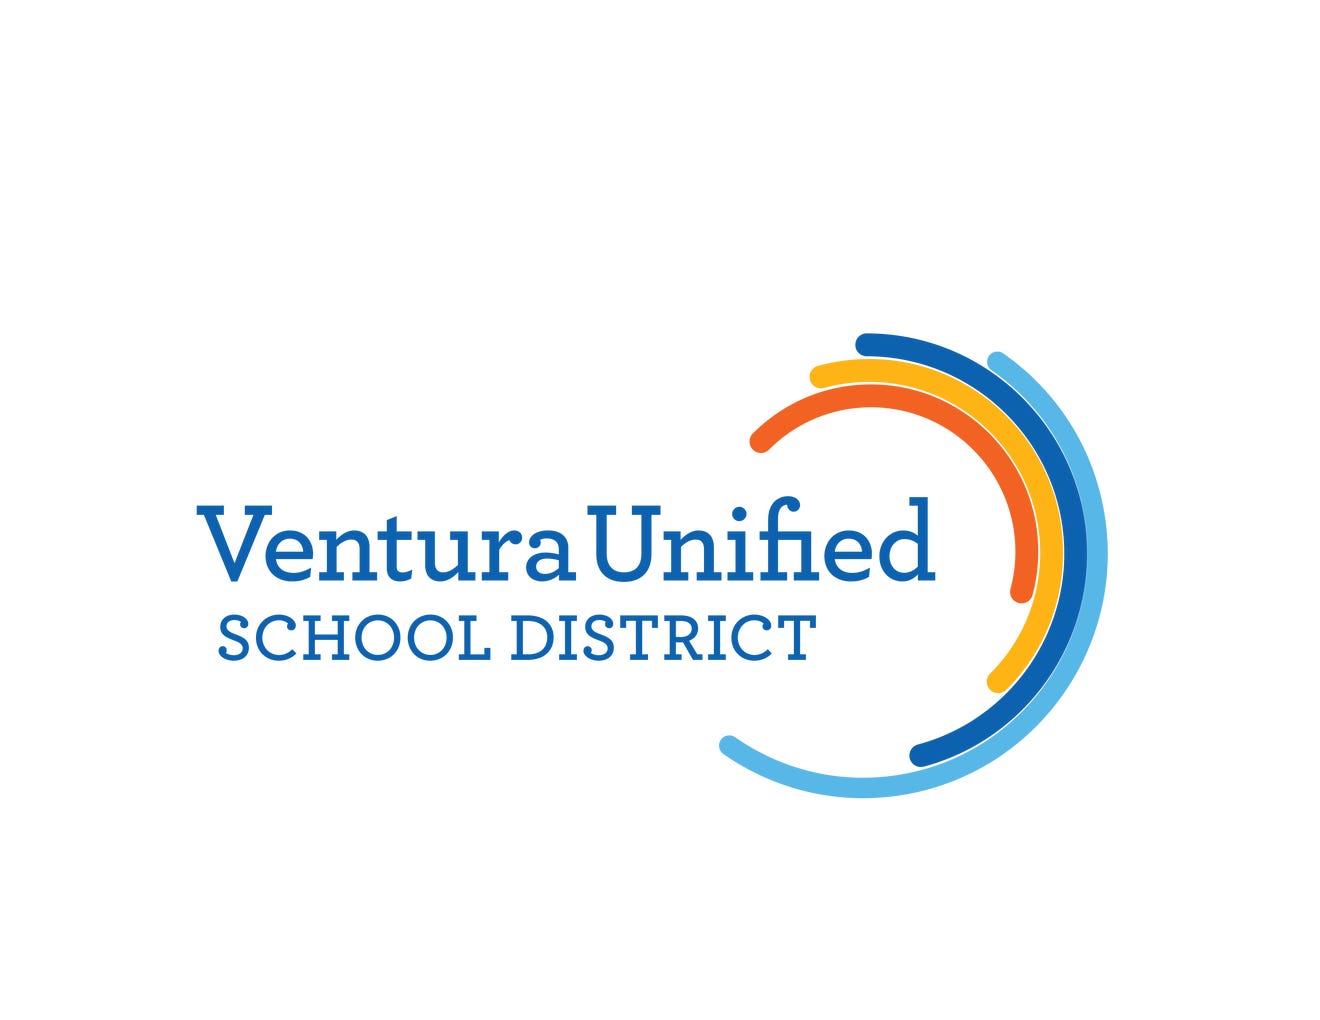 Ventura Unified has 5 pillars of new promise and brand